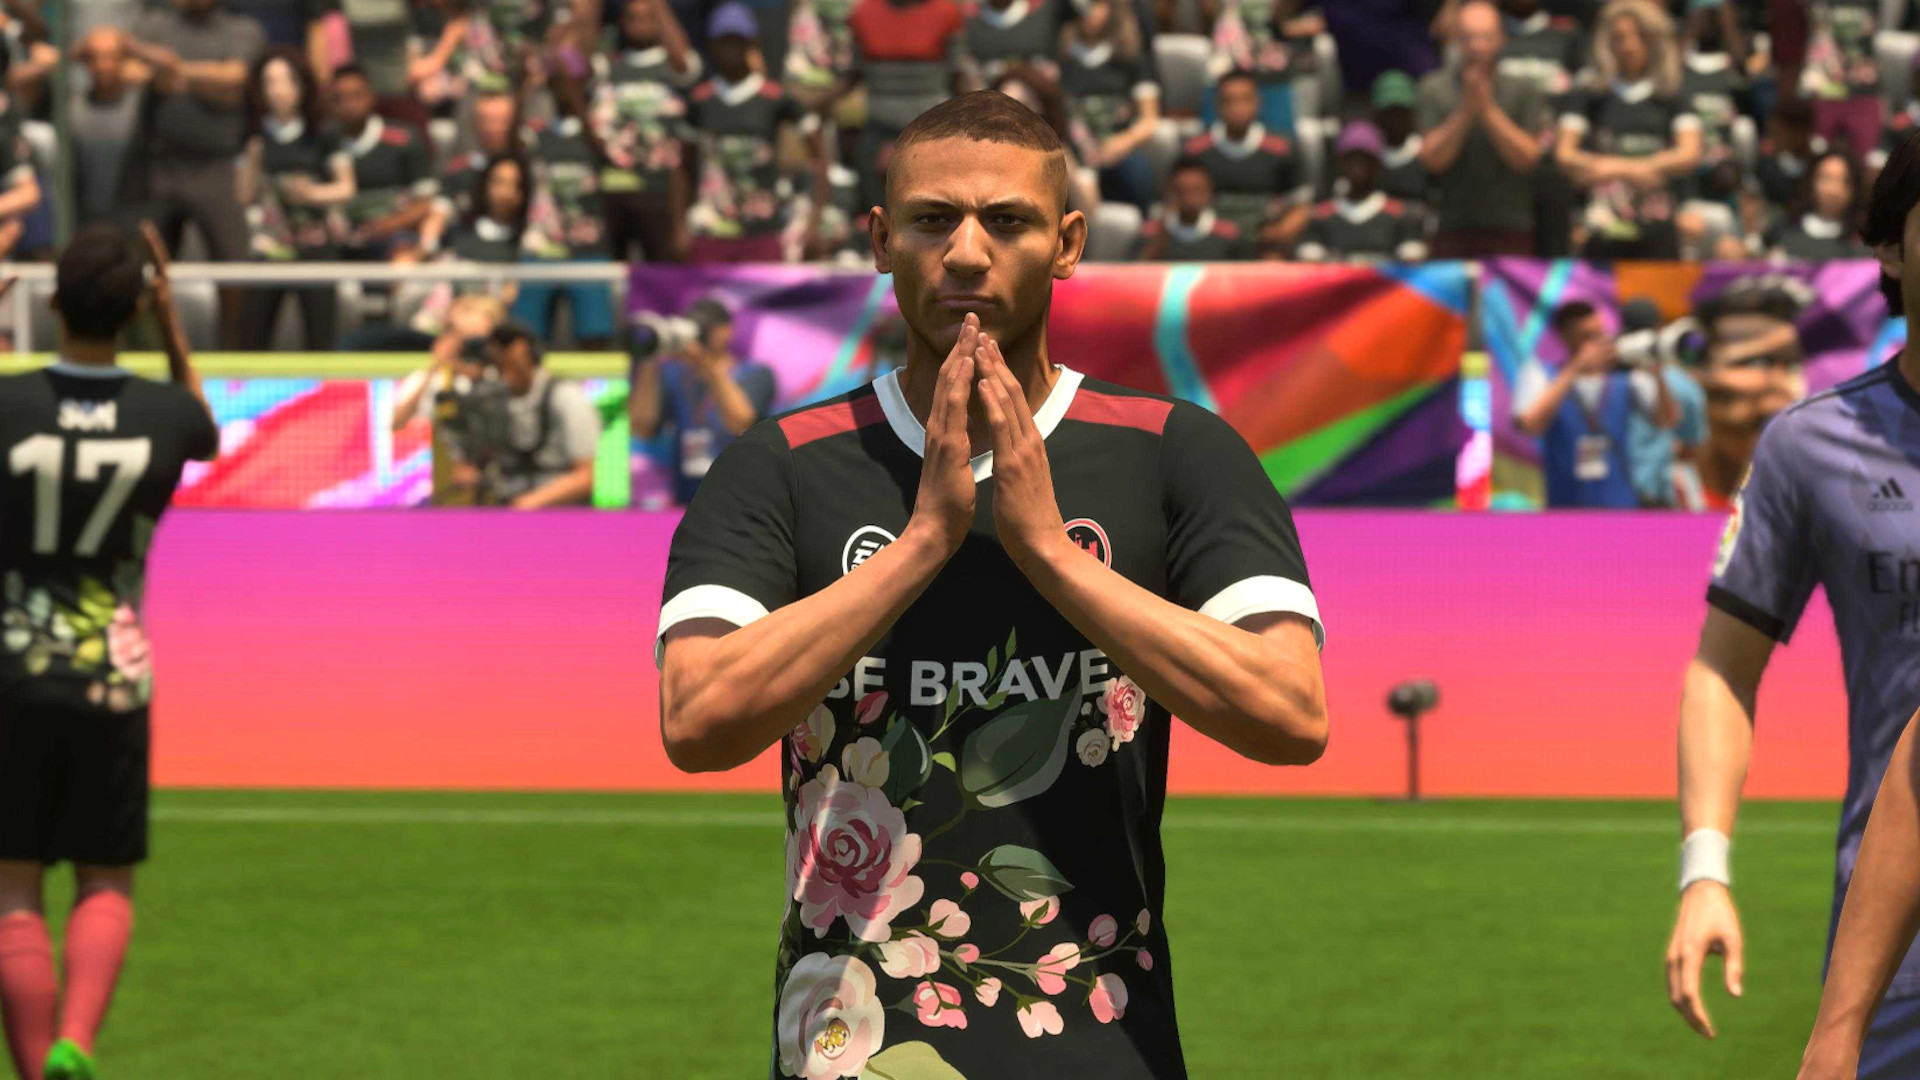 EA Sports FC 24 isn't even out yet and FIFA 23 has already been